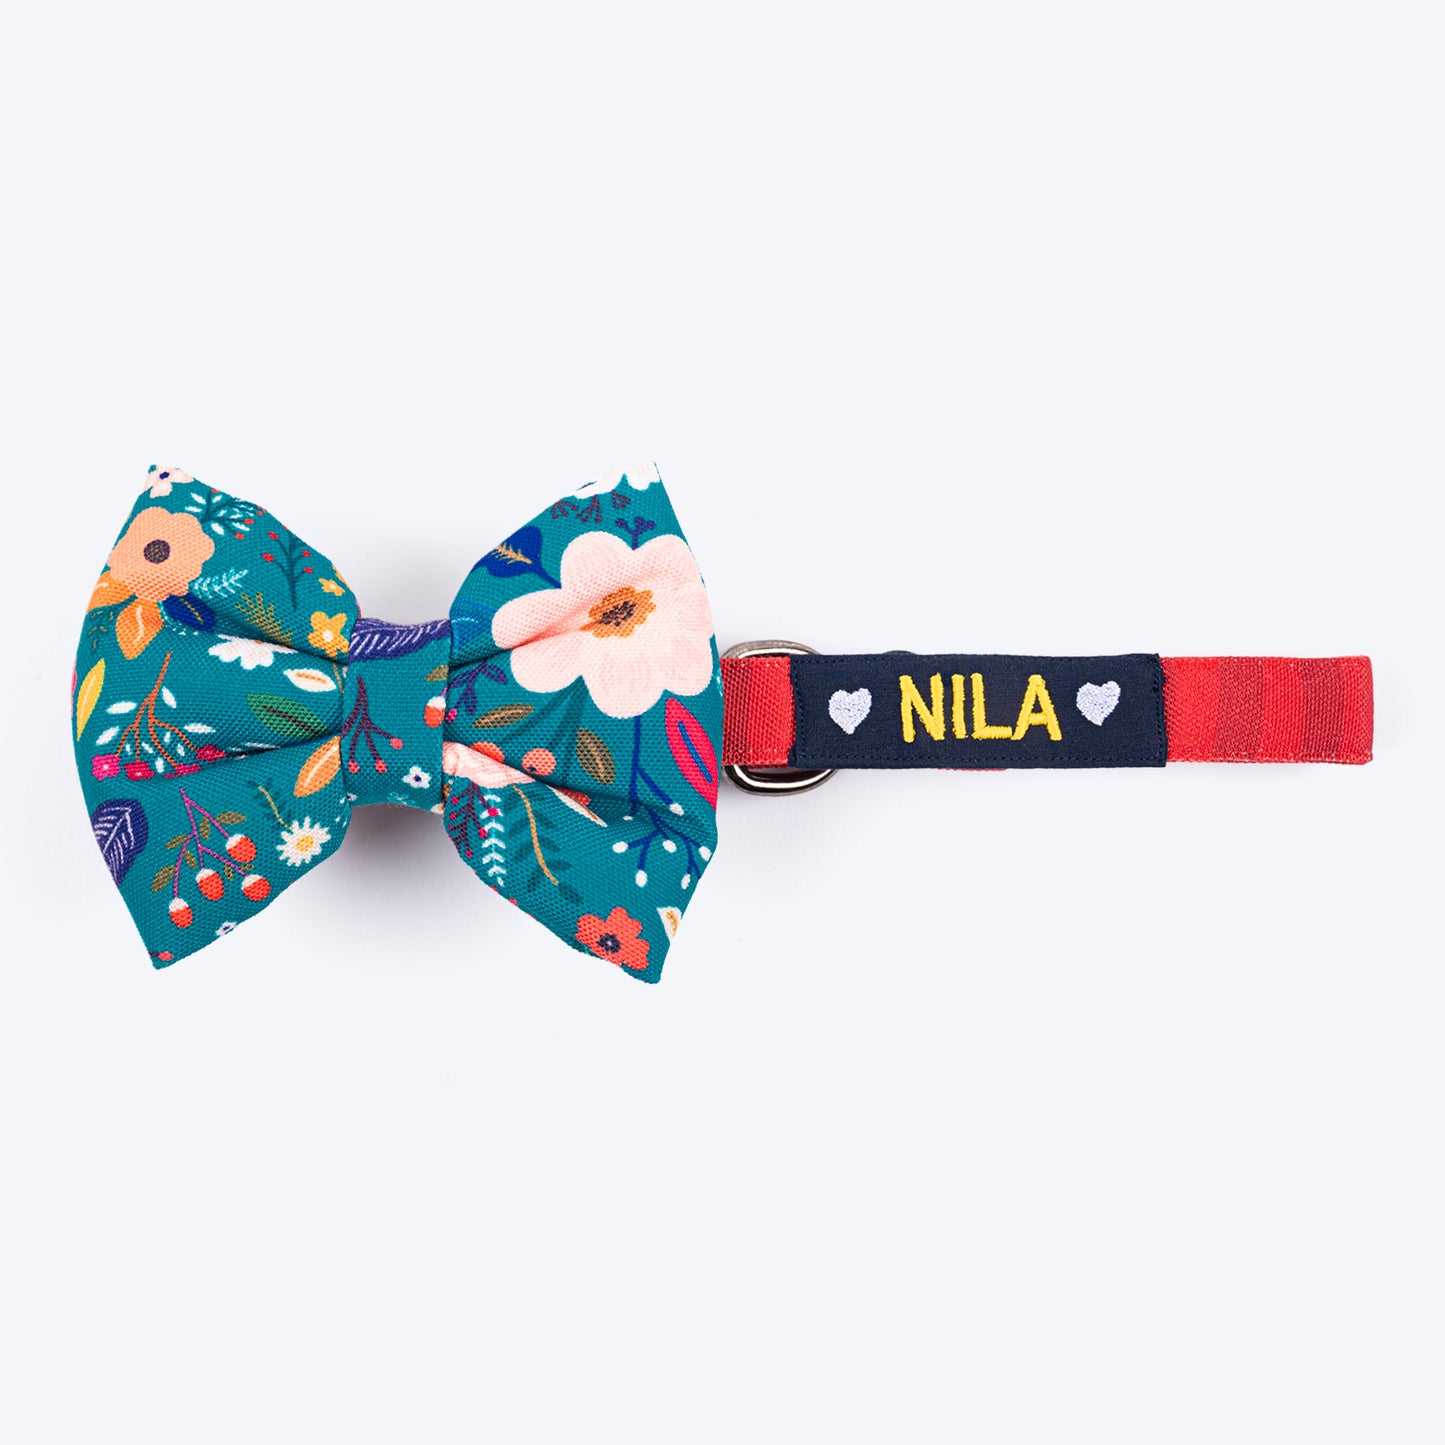 HUFT Personalised Blooming Days Fabric Collar For Dogs With Free Bow Tie - Teal Green - Heads Up For Tails